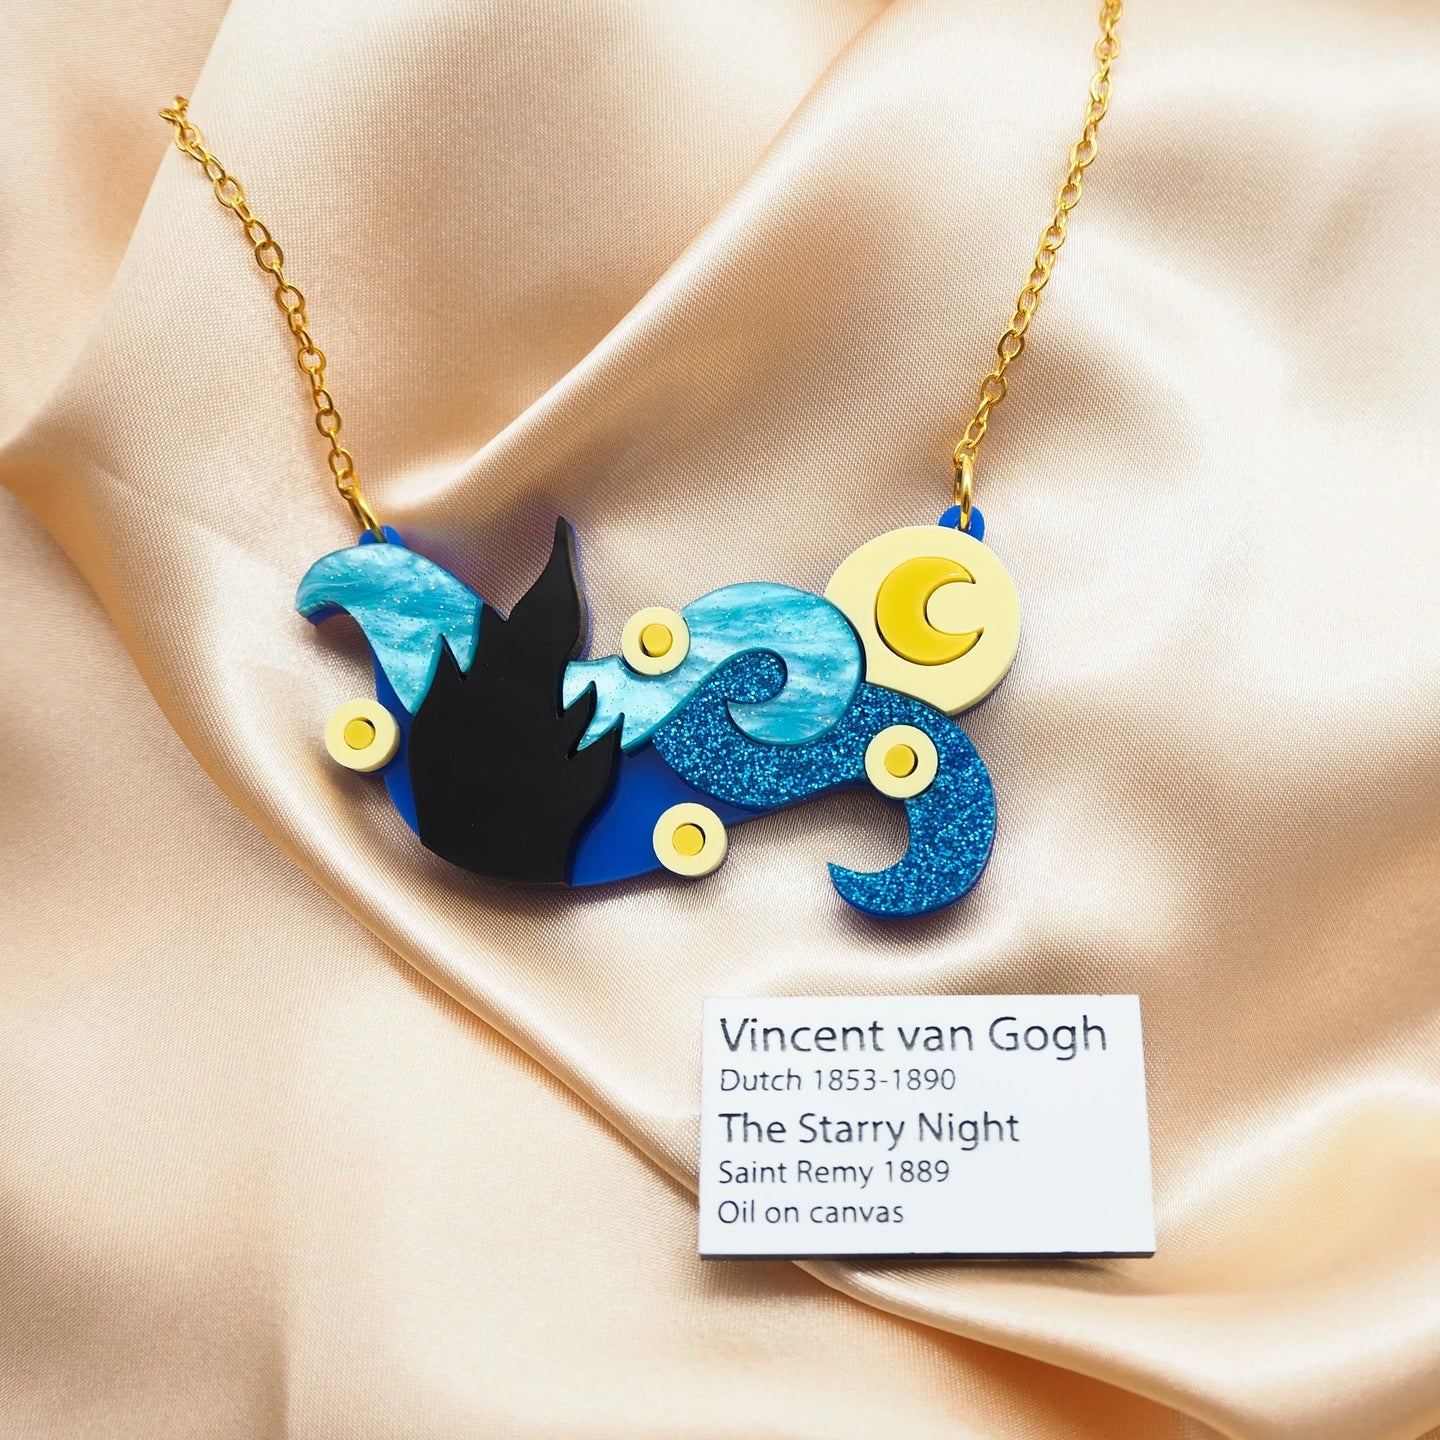 Dolly Dimple Design 'The Starry Night' Necklace and Mini Label Brooch Set